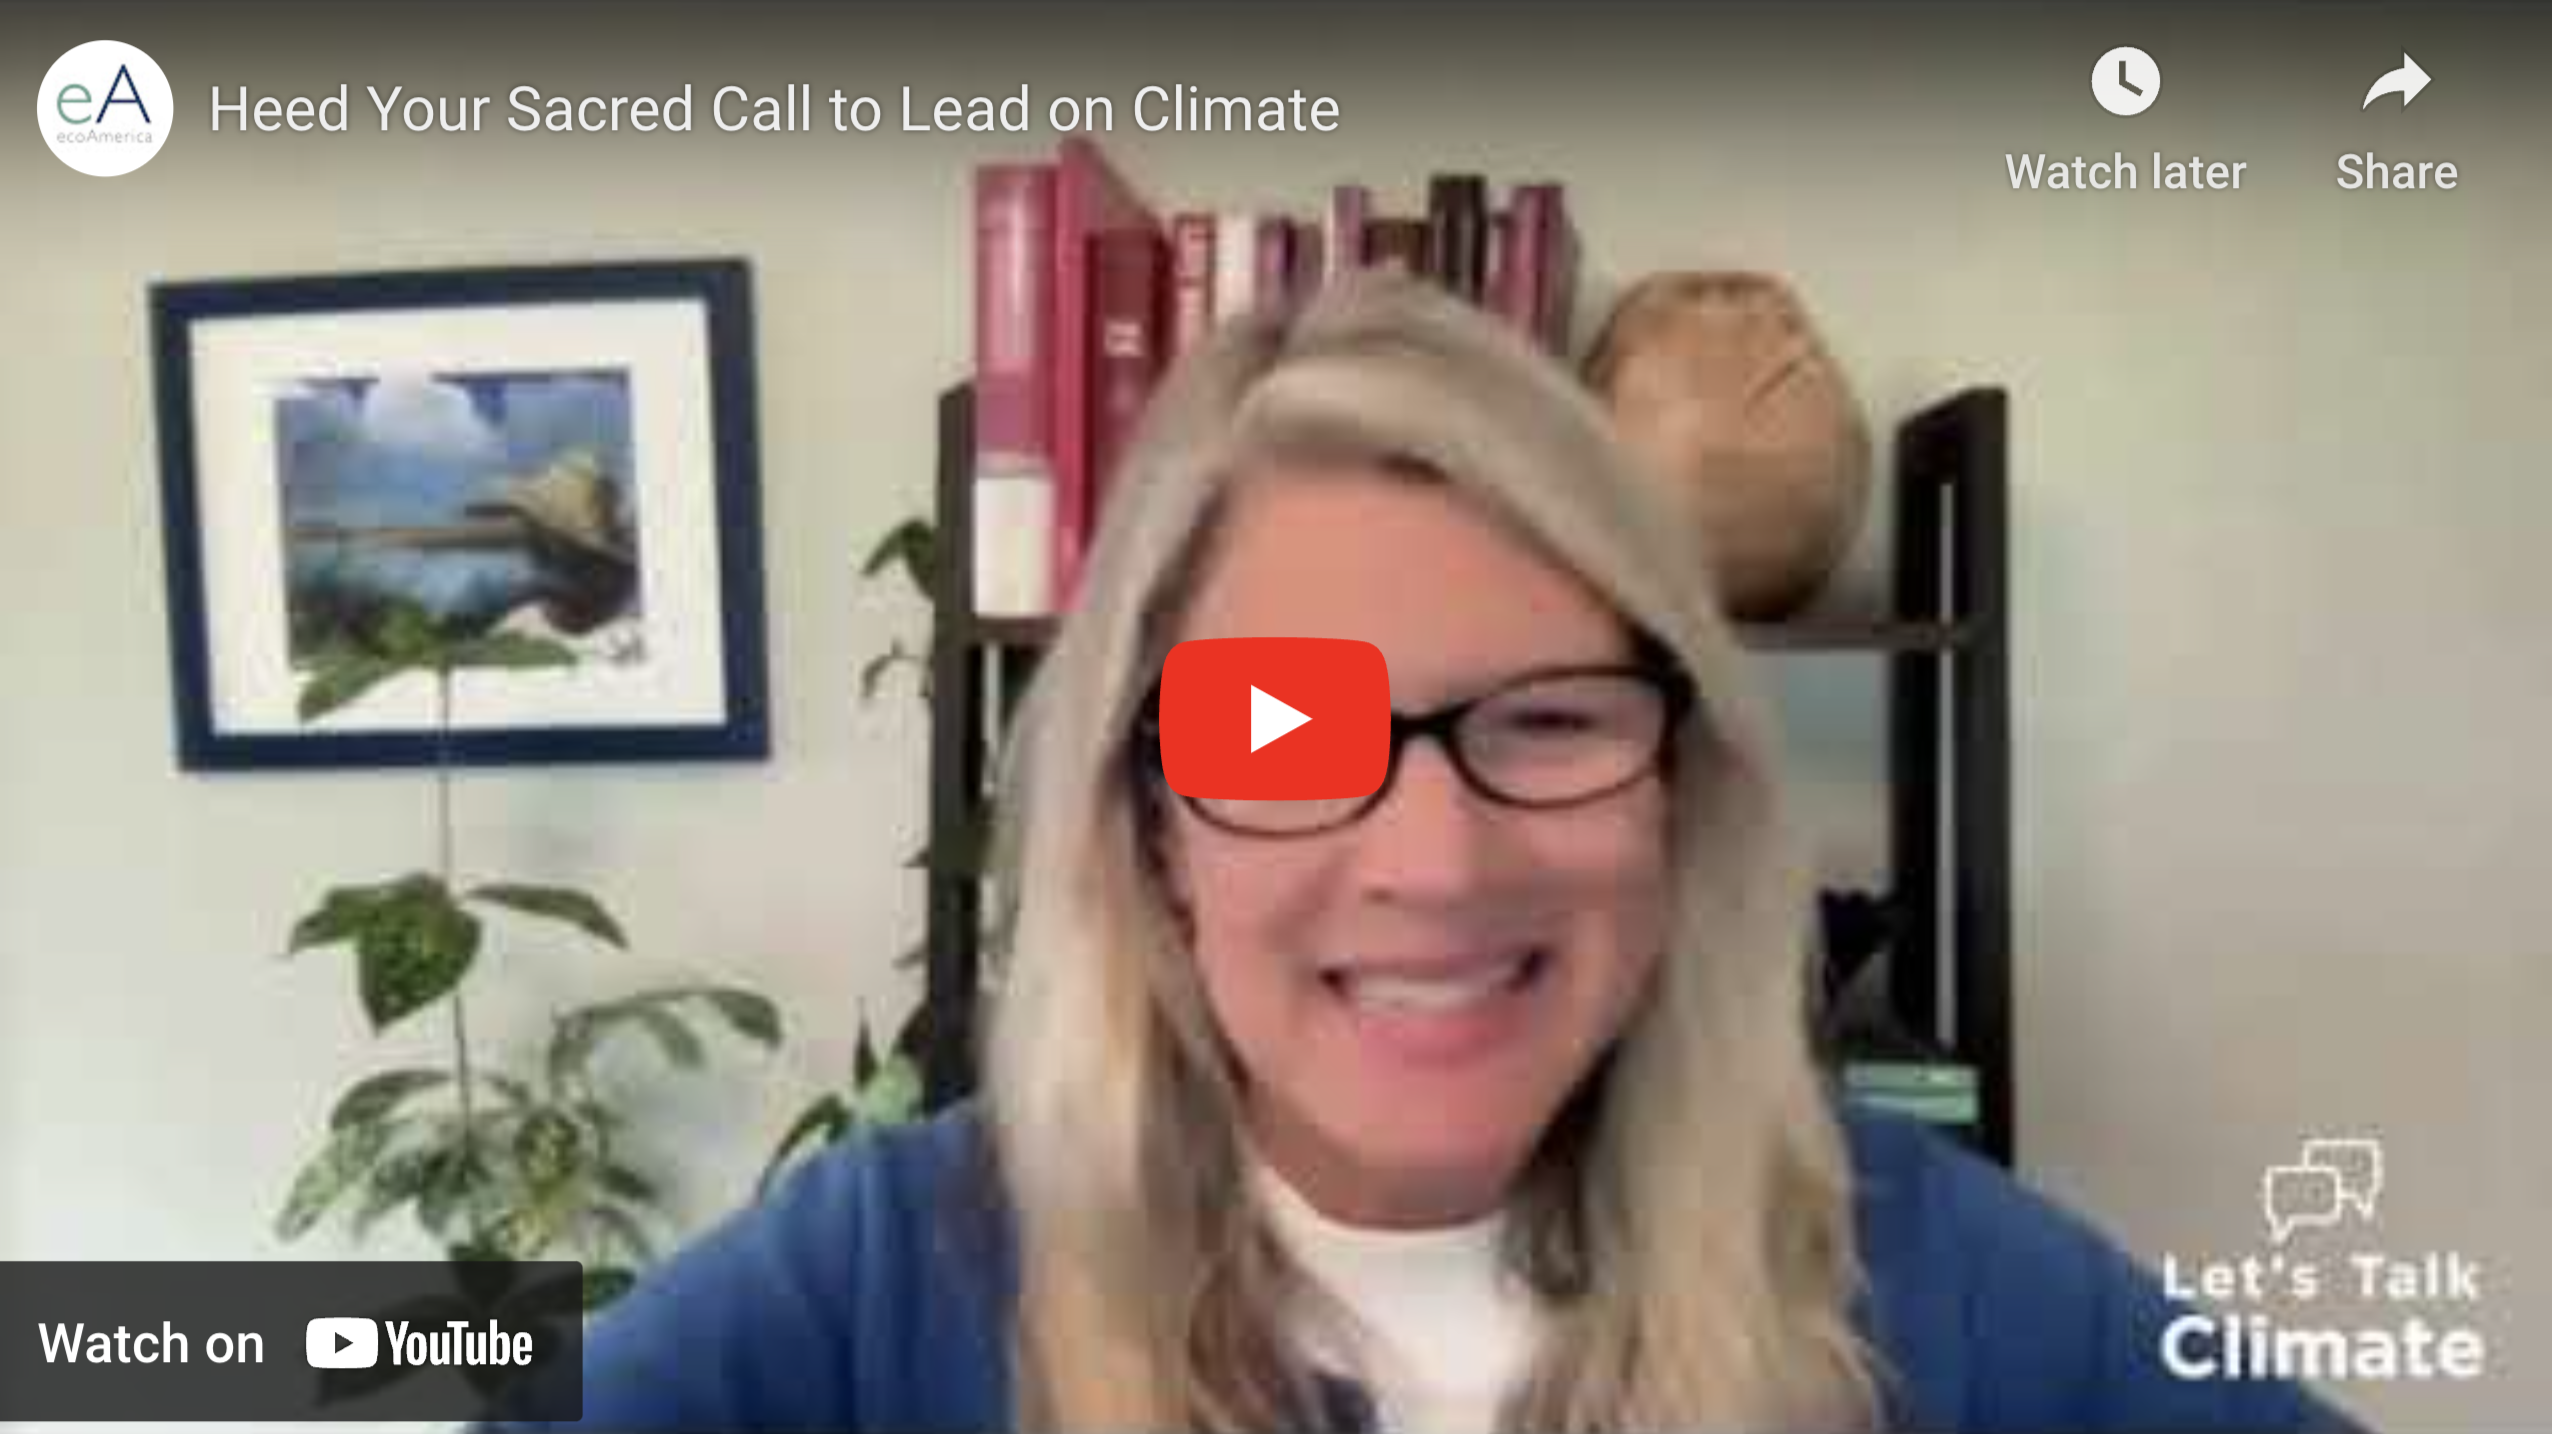 Heed Your Sacred Call to Lead on Climate